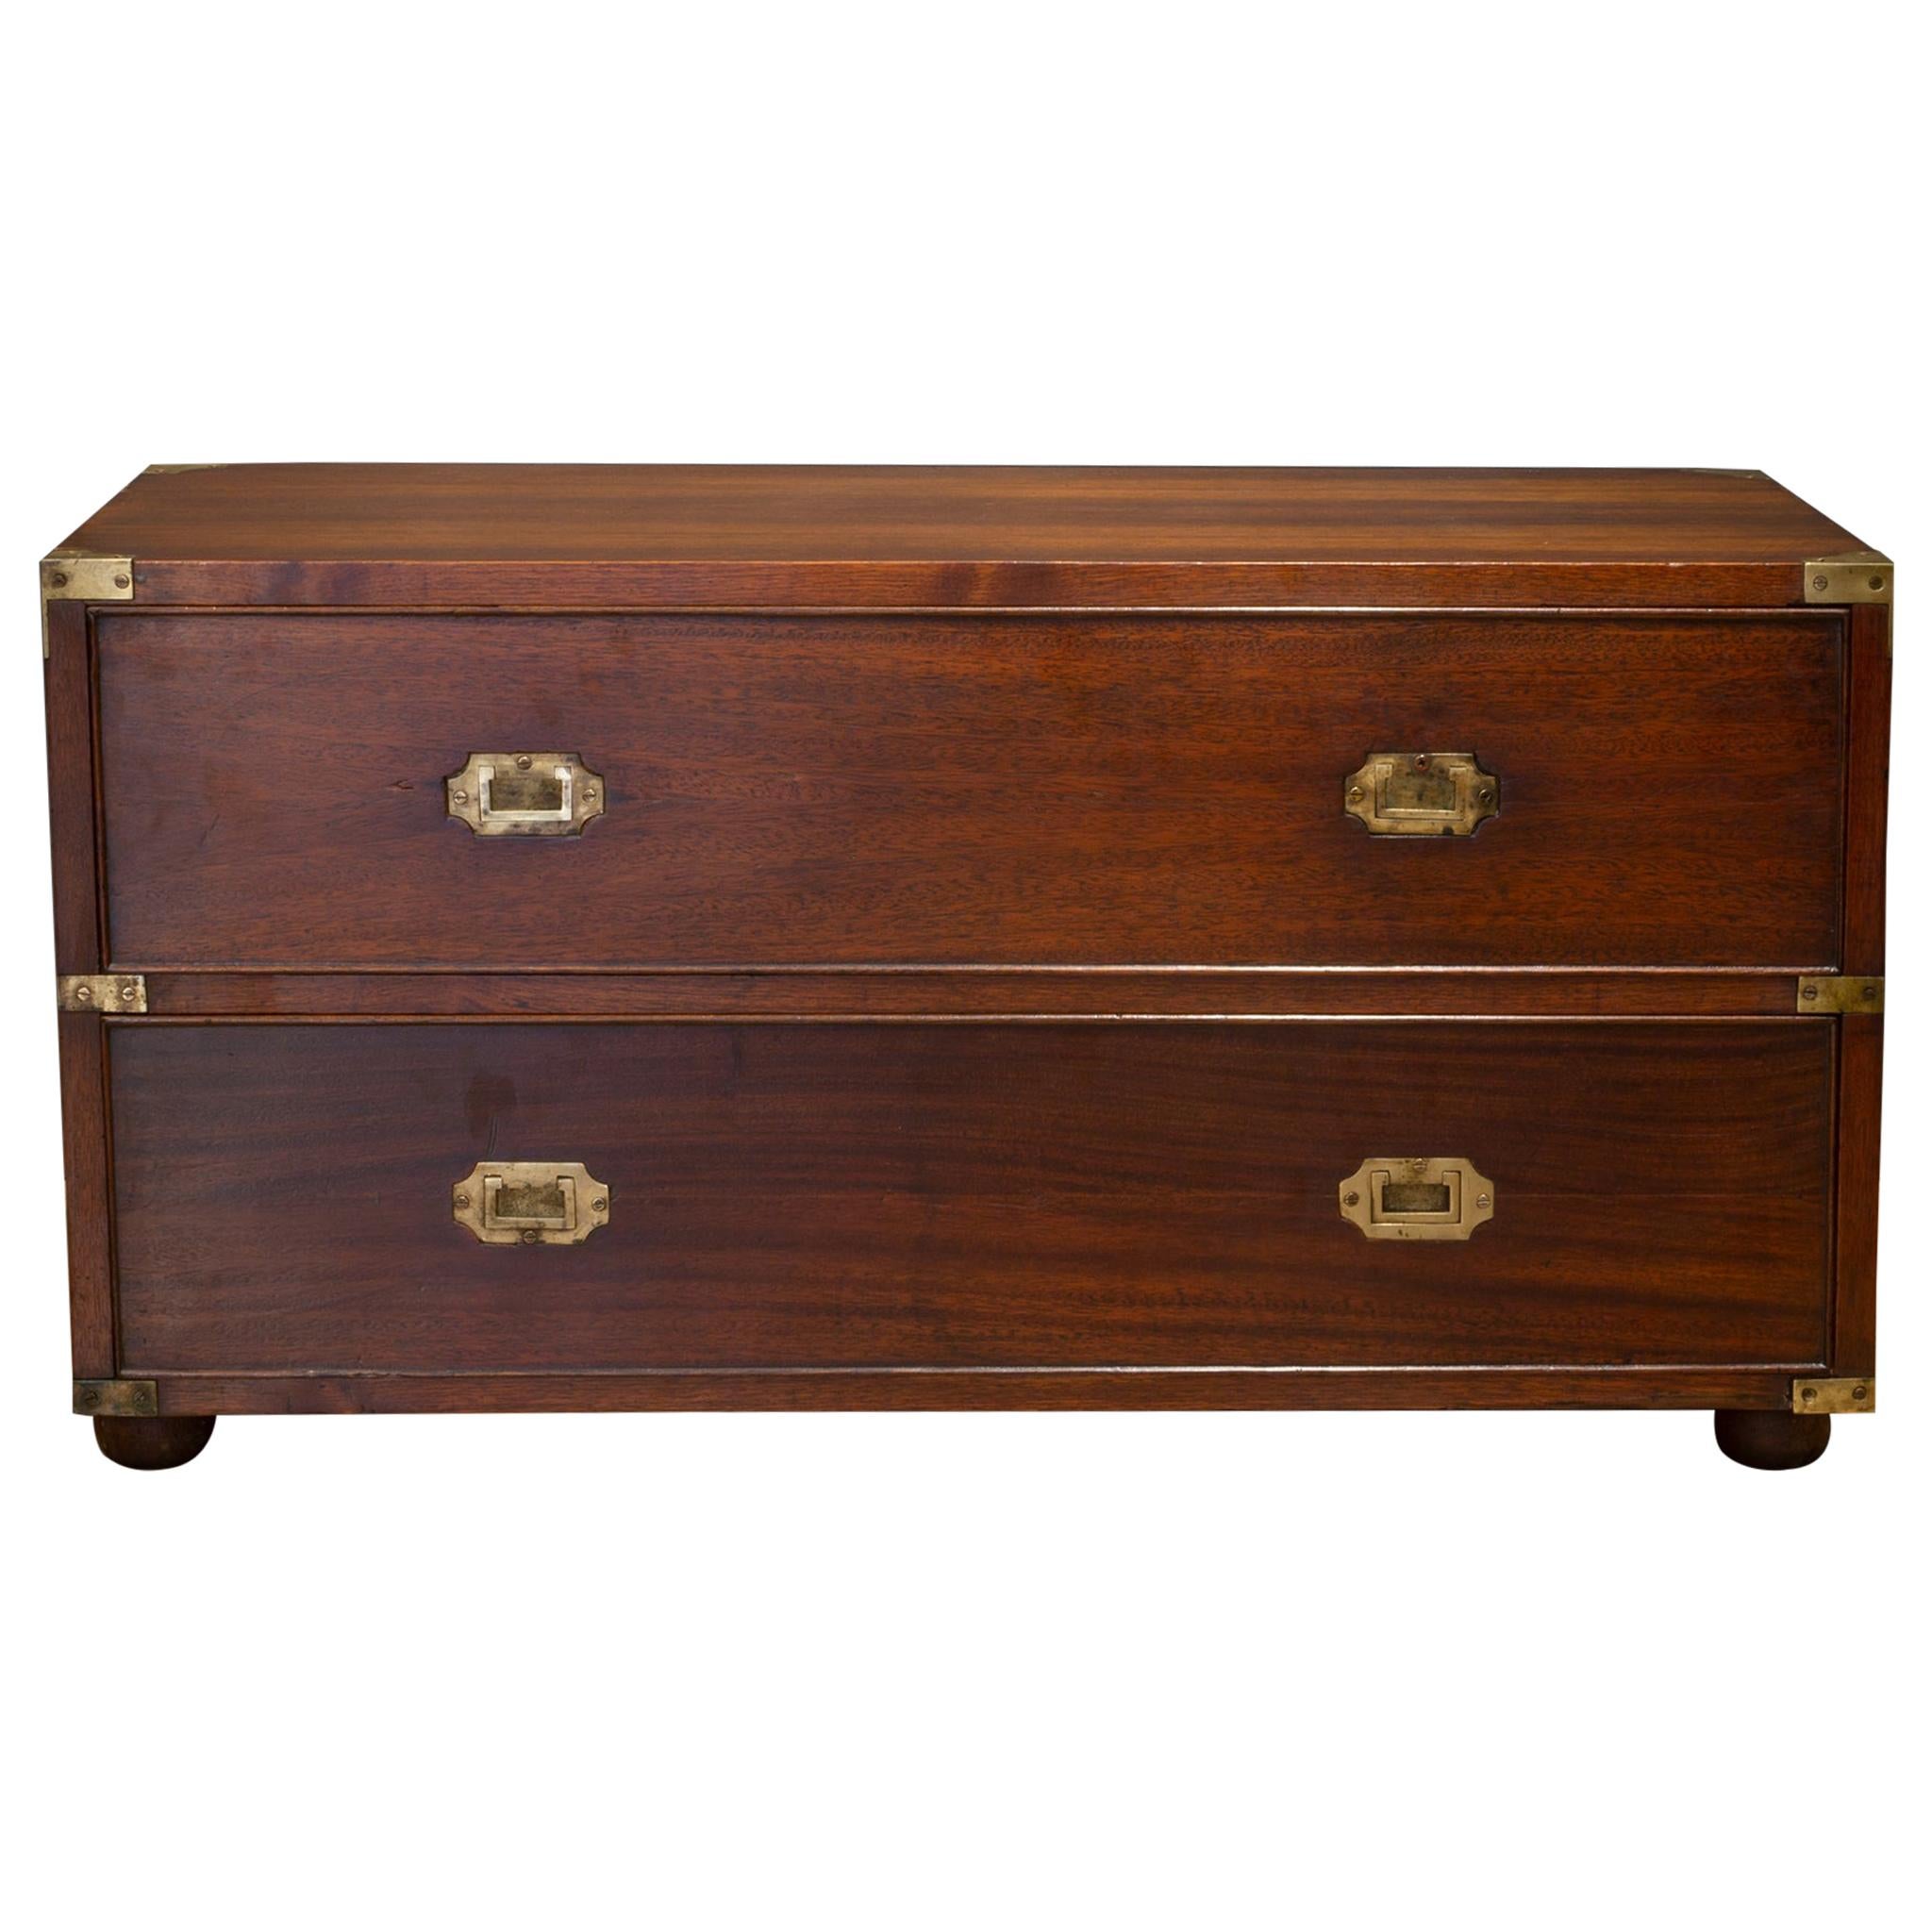 Mid-19th Century Mahogany and Brass Campaign Chest, circa 1850s